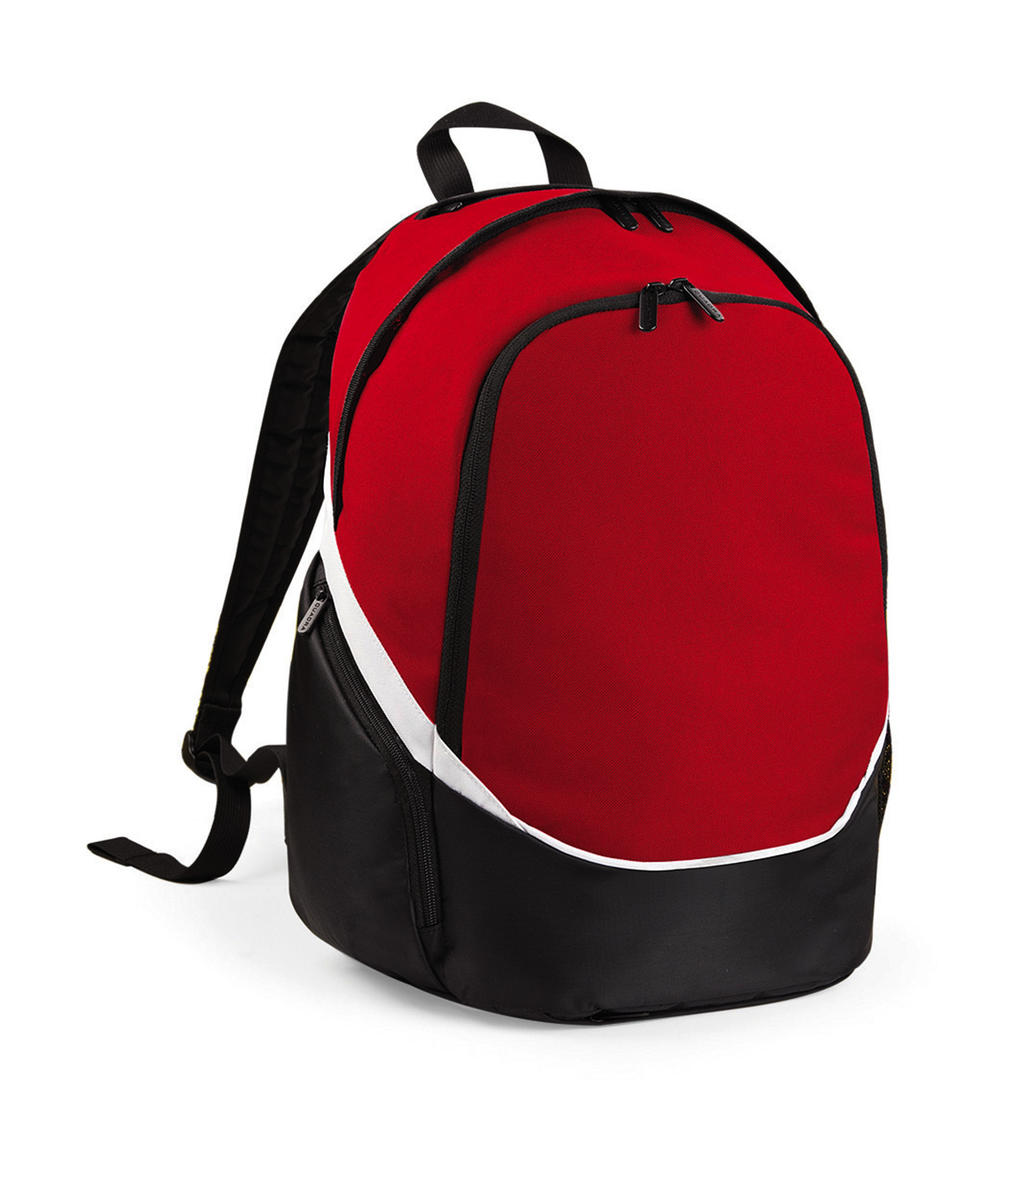  Pro Team Backpack in Farbe Classic Red/Black/White